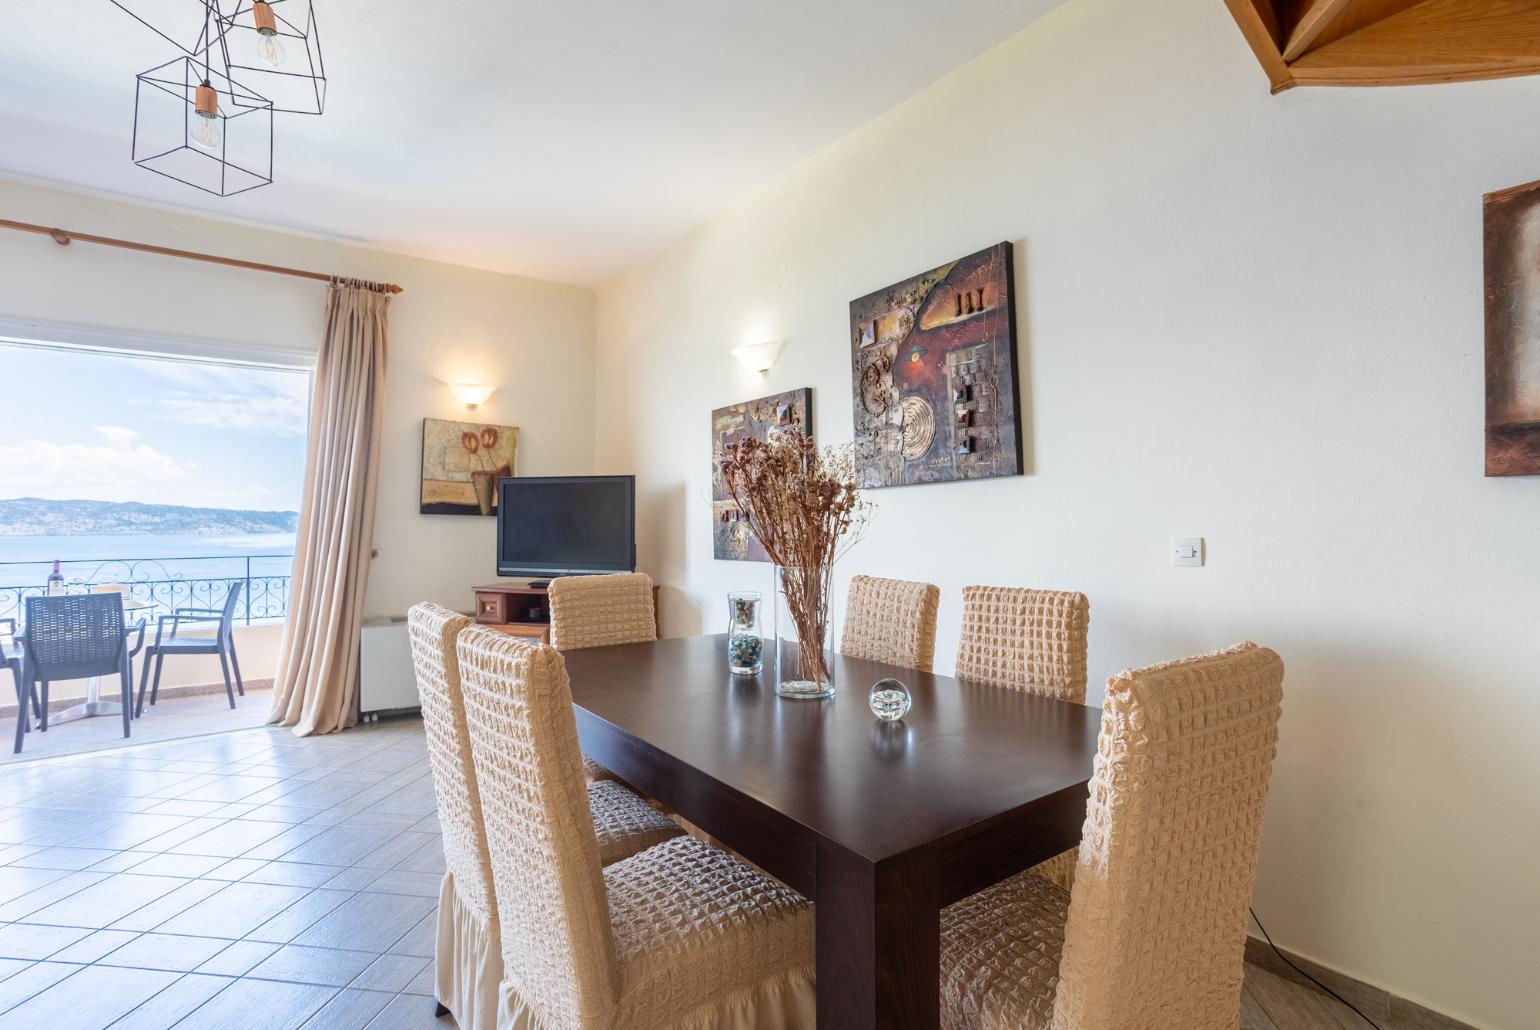 Open-plan living room with sofas, dining area, kitchen, ornamental fireplace, WiFi internet, satellite TV, and balcony access with panoramic sea views